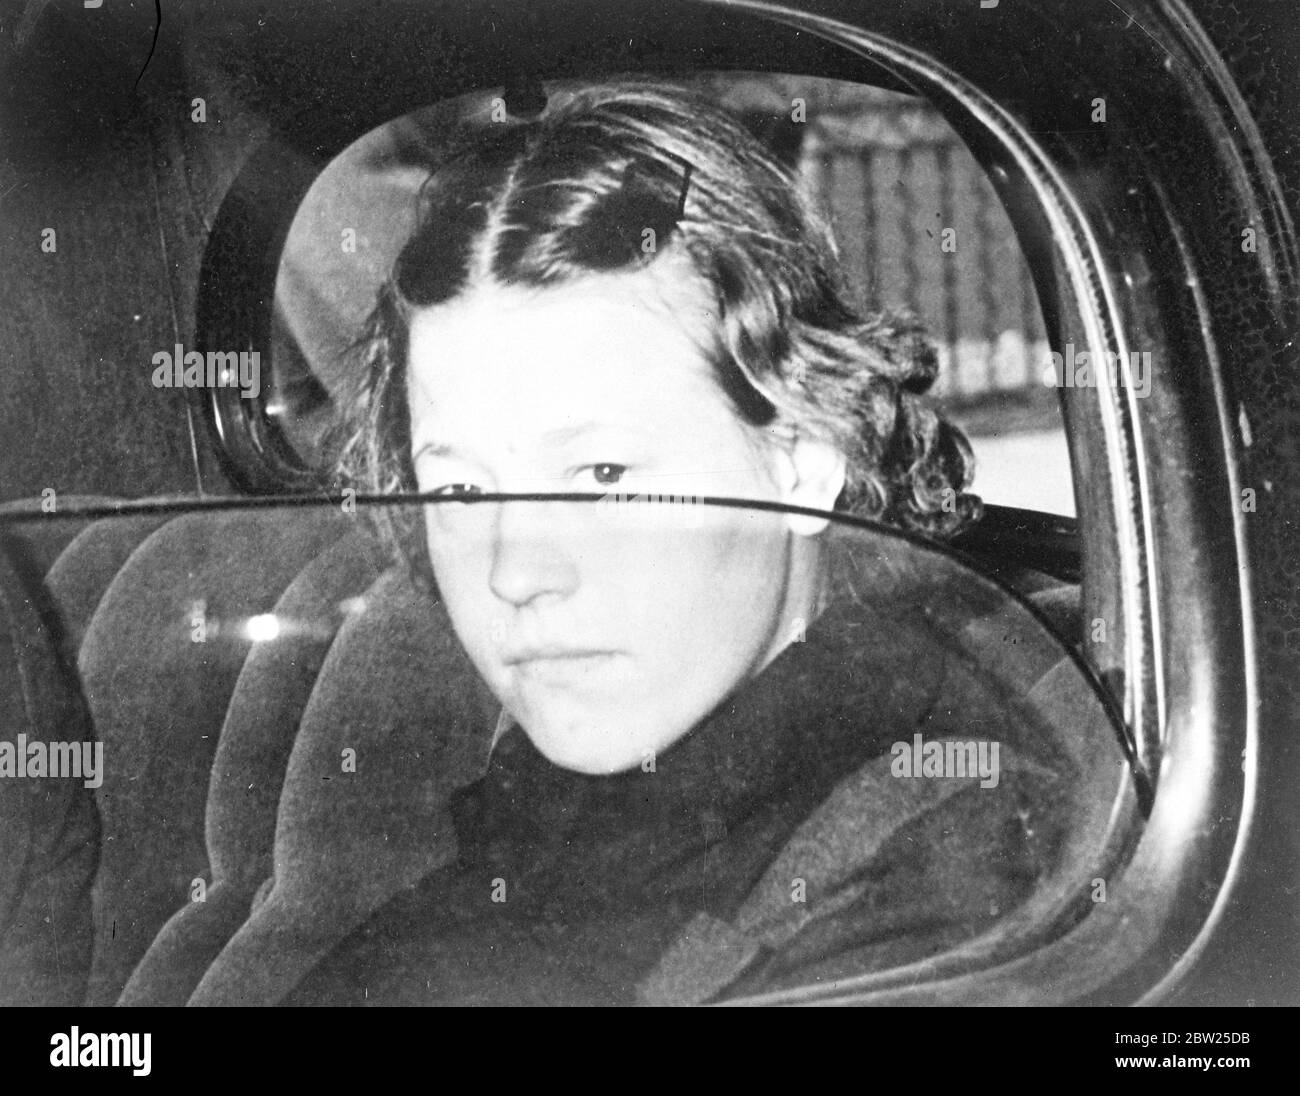 Sister confesses to killing brothers Barak poison. 22-year-old Elizabeth Wagner is alleged by New York police to have confessed to killing her two brothers in Astoria with rat poison. She said she gave the boys,, Charles and Henry Wagner, aged 14 and 21, small doses of arsenic on four different occasions in milk and orange juice, and kept the poison hidden in an oven tray of the guest stove. Photo shows, Elizabeth Wagner , photographed in a police car as she was taken to headquarters. 2 May 1938 Stock Photo